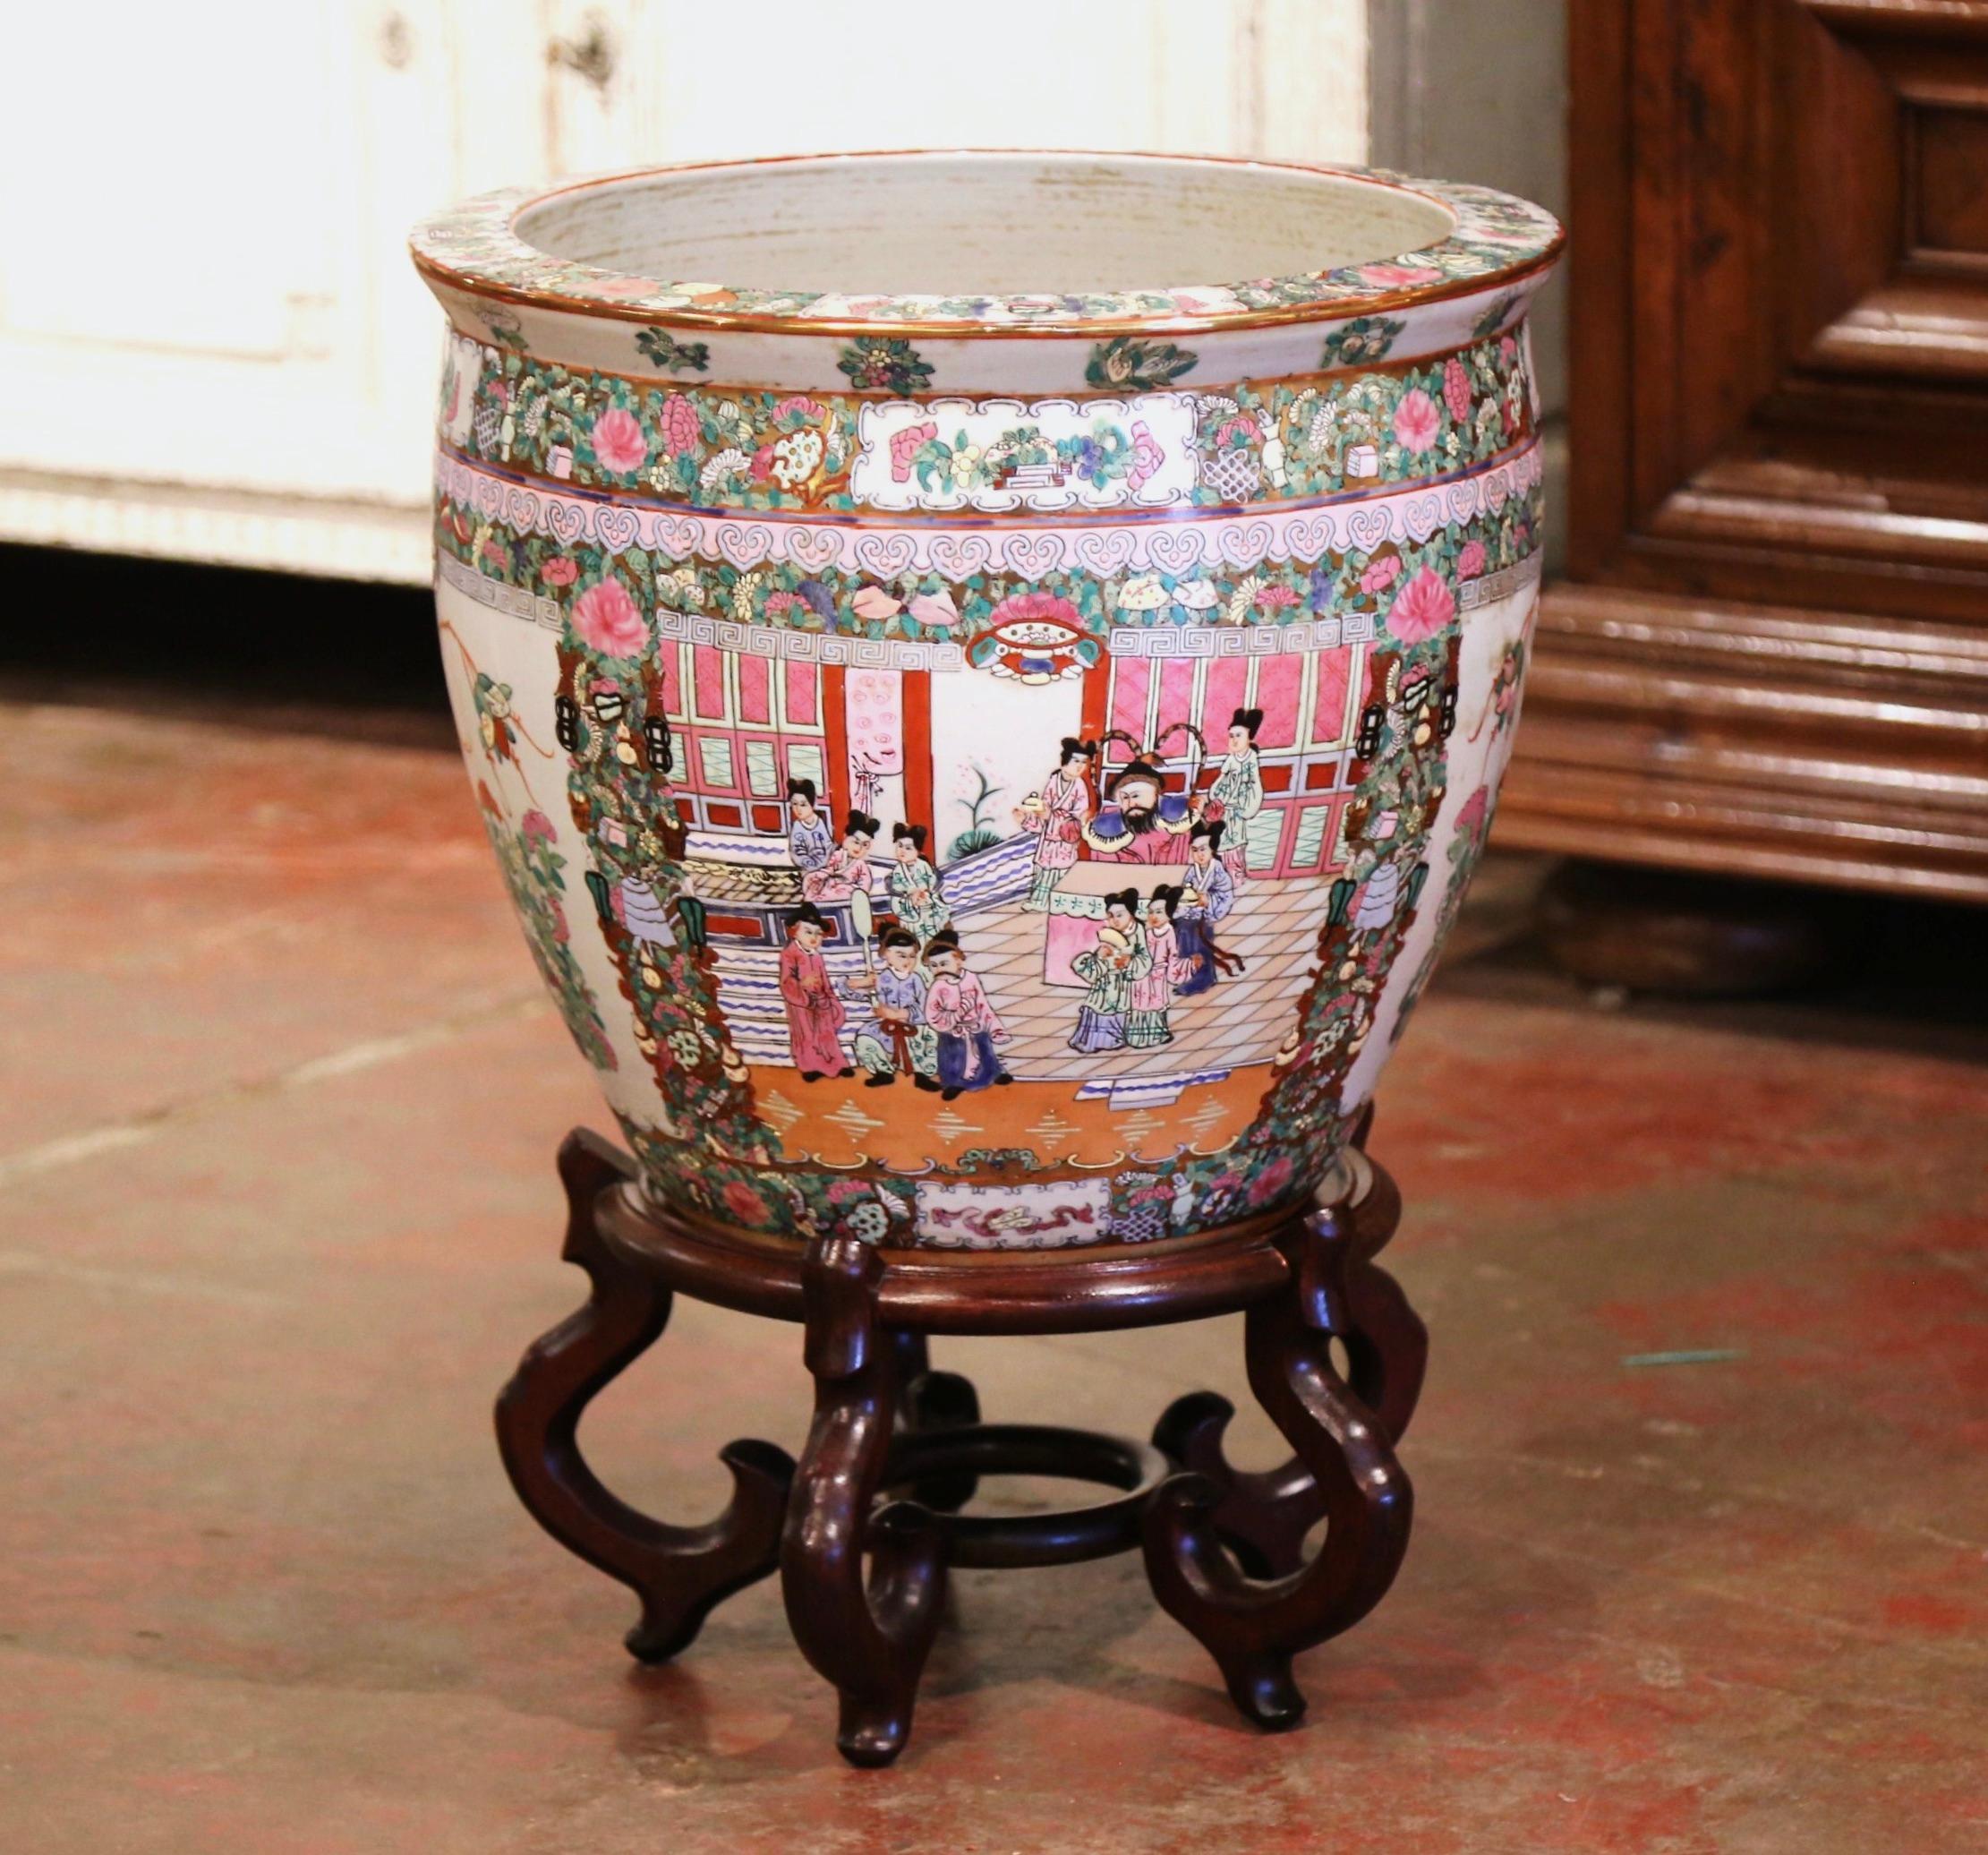 This elegant and colorful vintage fishbowl standing on a carved fruitwood base was created in China, circa 1960. Round in shape, the large, exotic porcelain planter features Classic oriental scenes with Chinese people throughout, and embellished